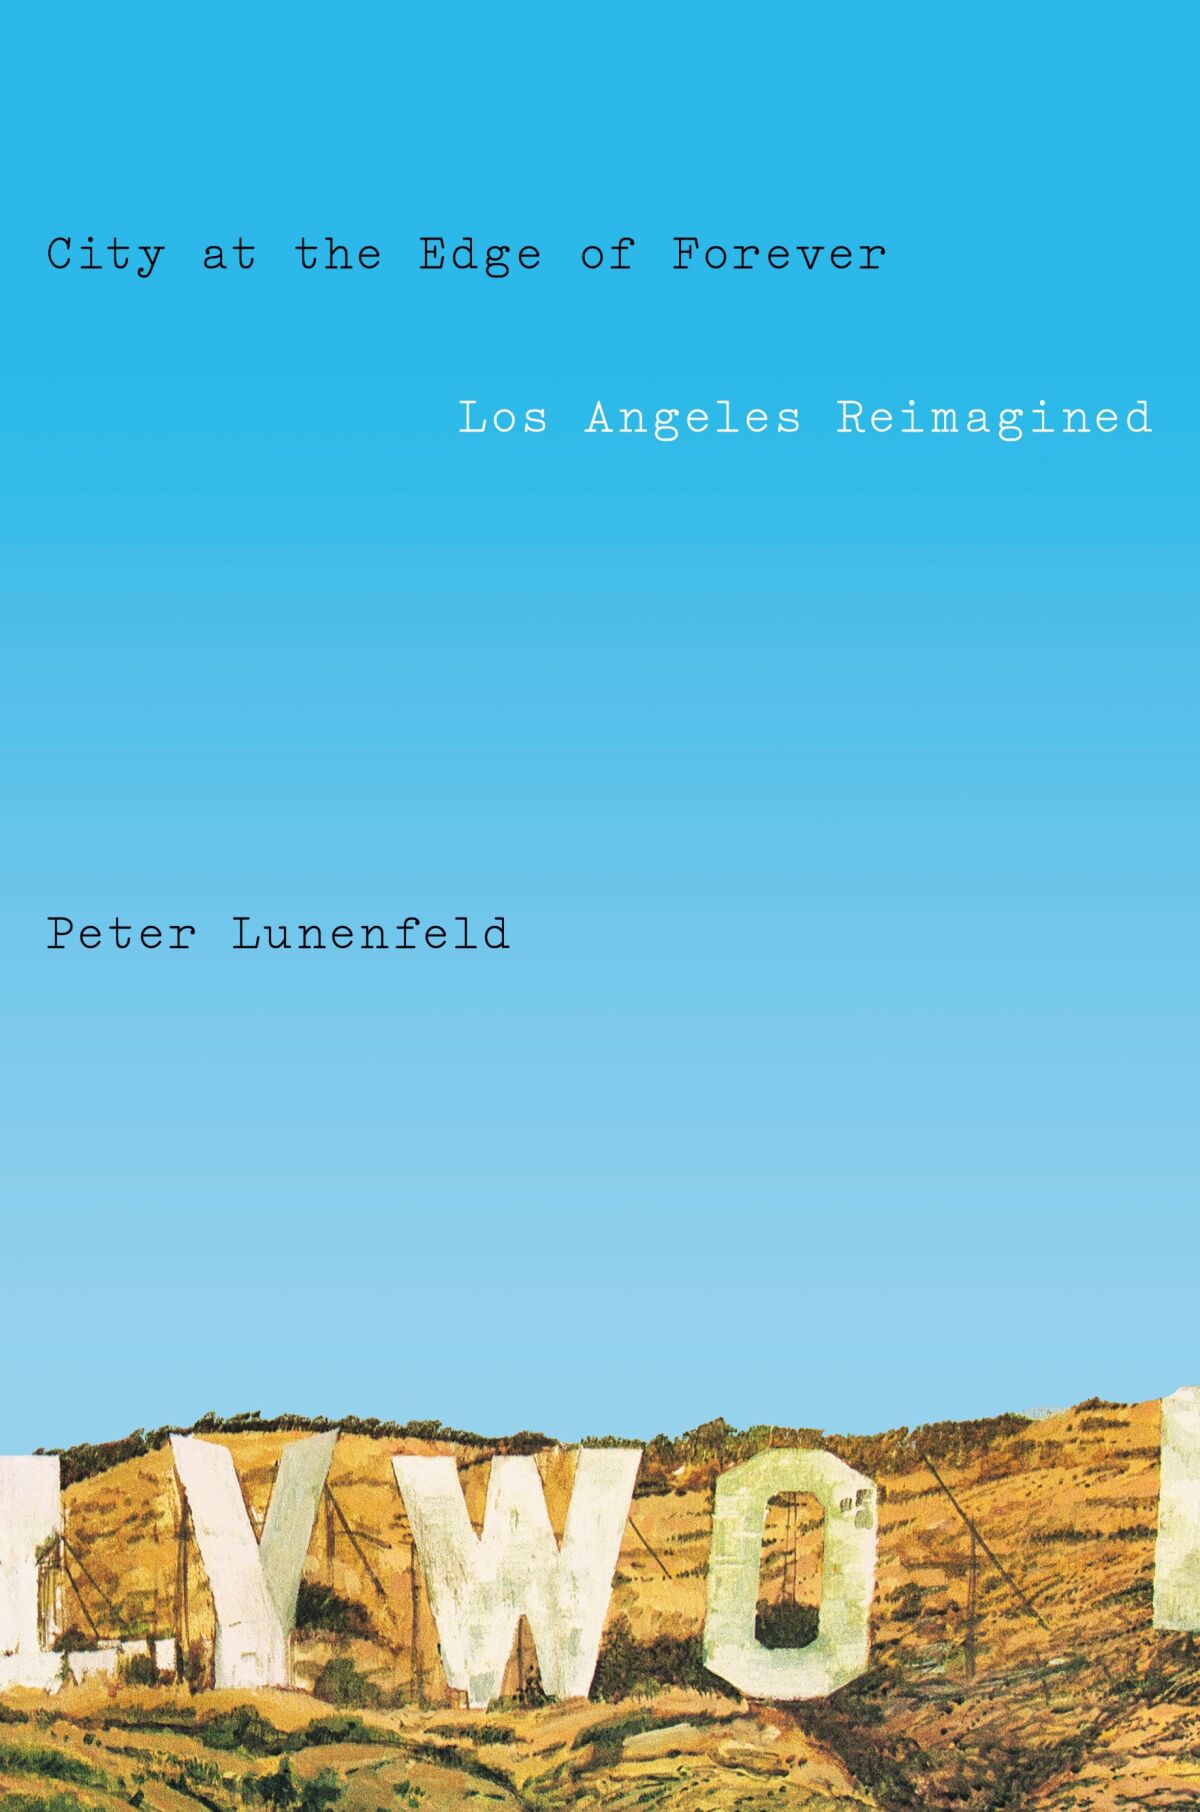 The cover of "City at the Edge of Forever: Los Angeles Reimagined" by Peter Lunenfeld.